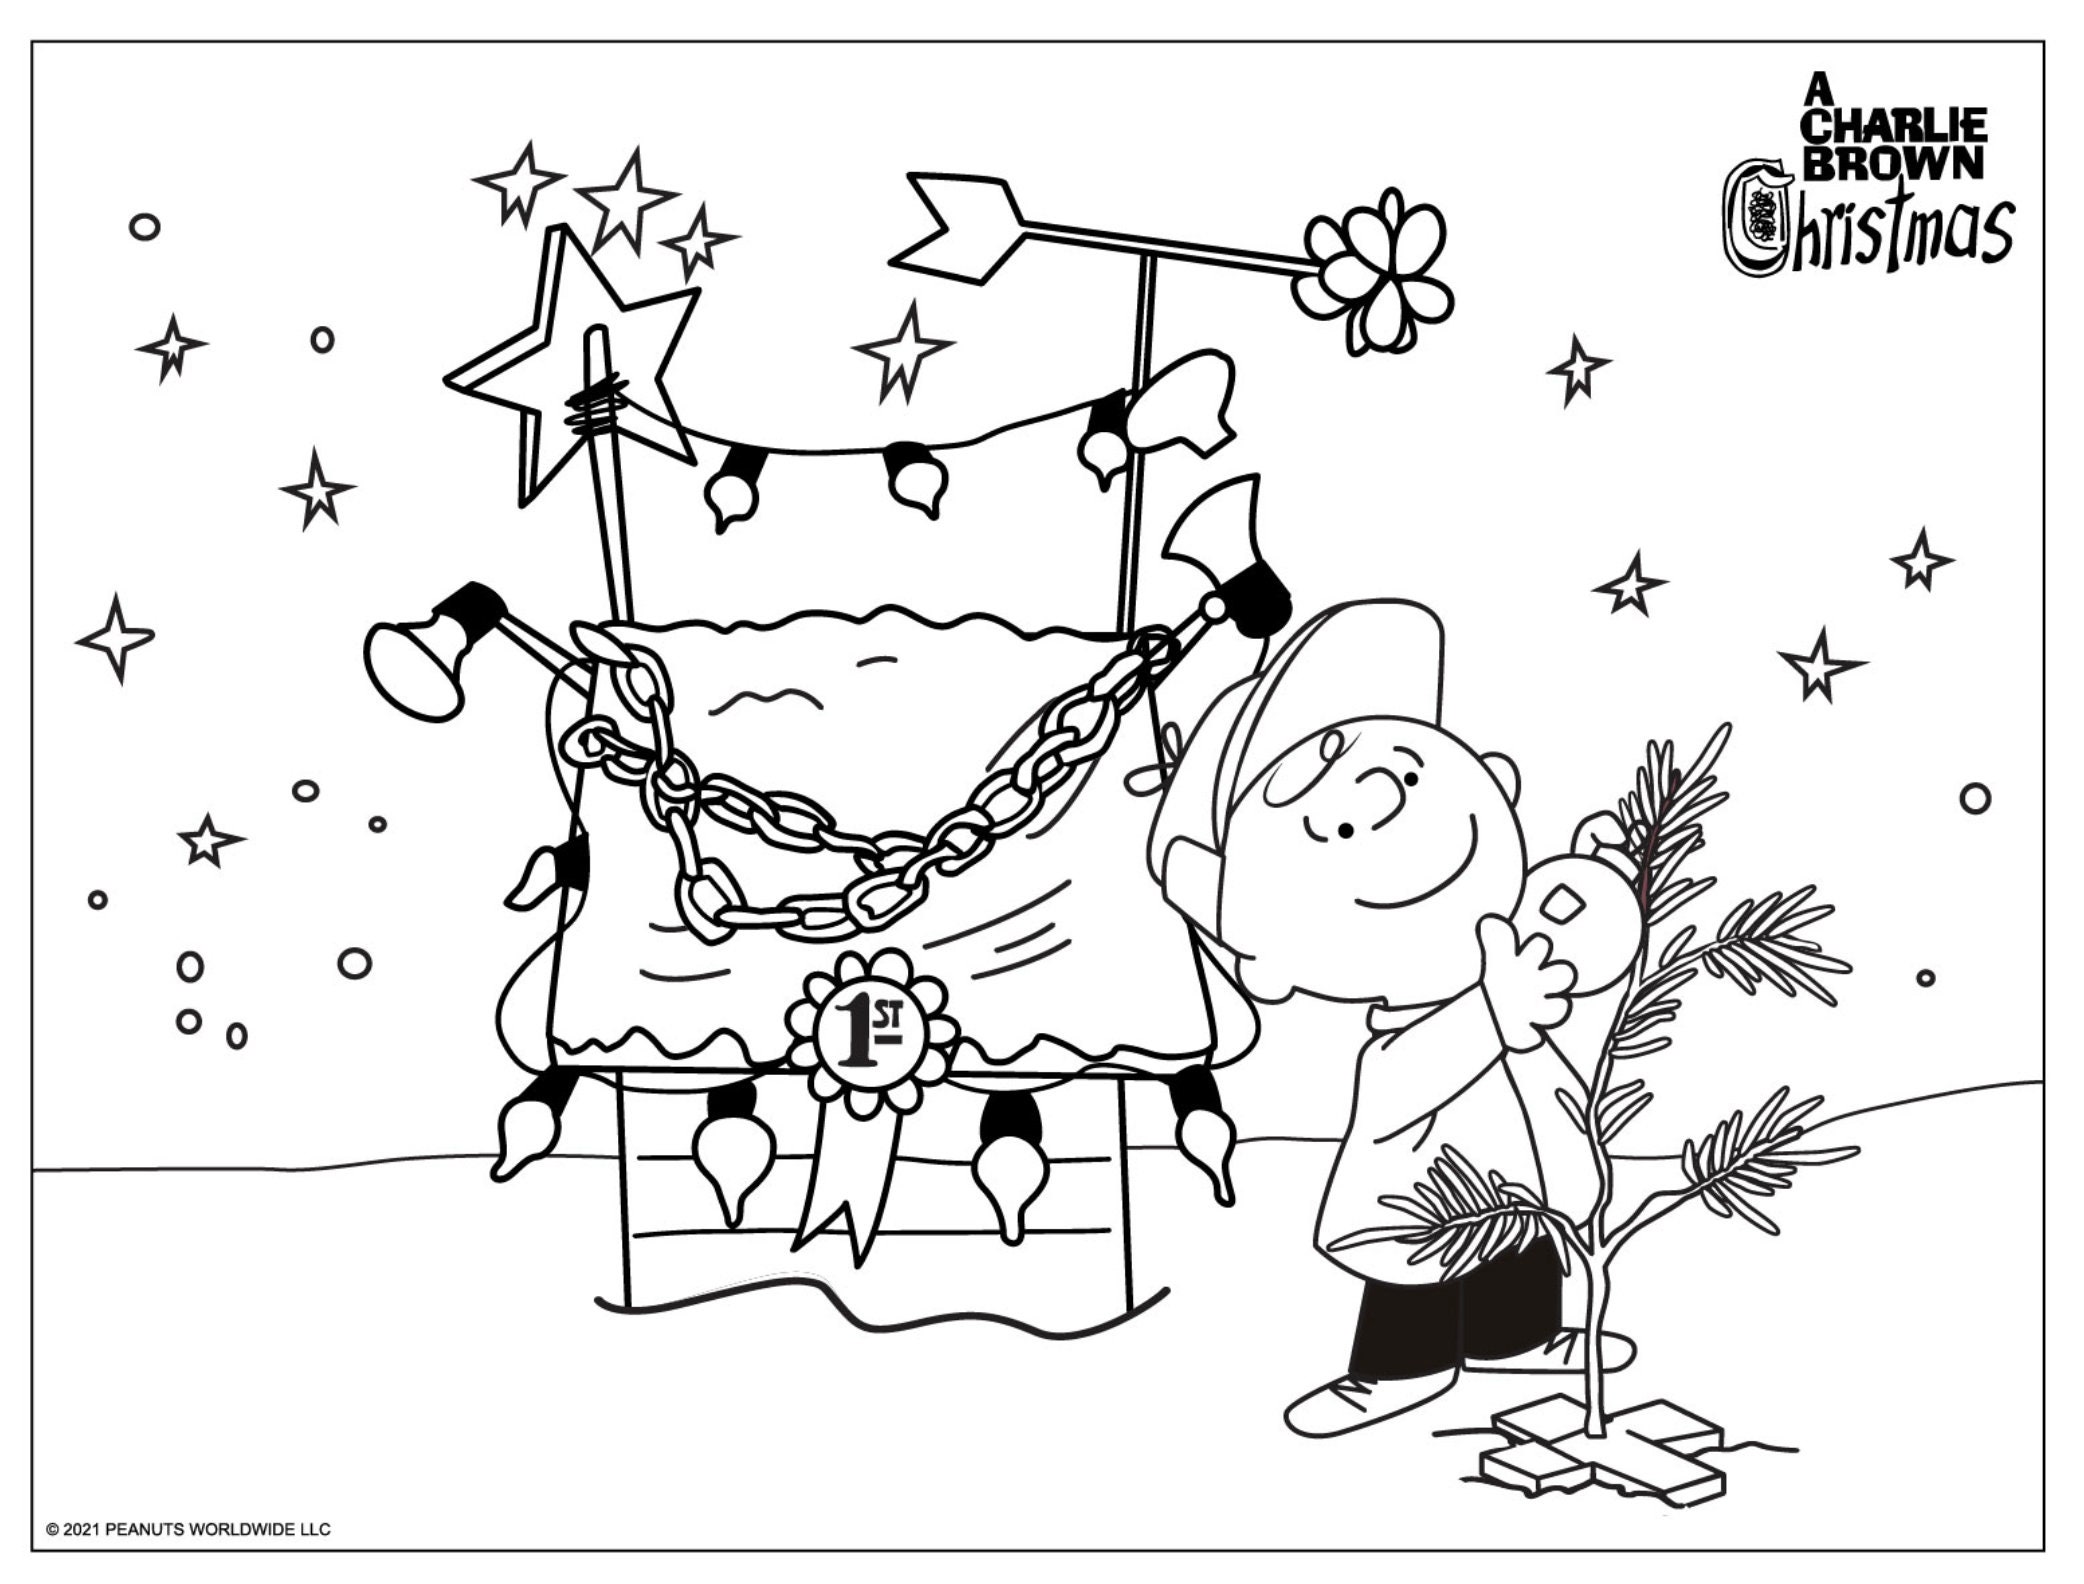 Peanuts charlie brown holiday coloring pages peanuts christmas pages peanuts thanksgiving pages peanuts easter peanuts valentines